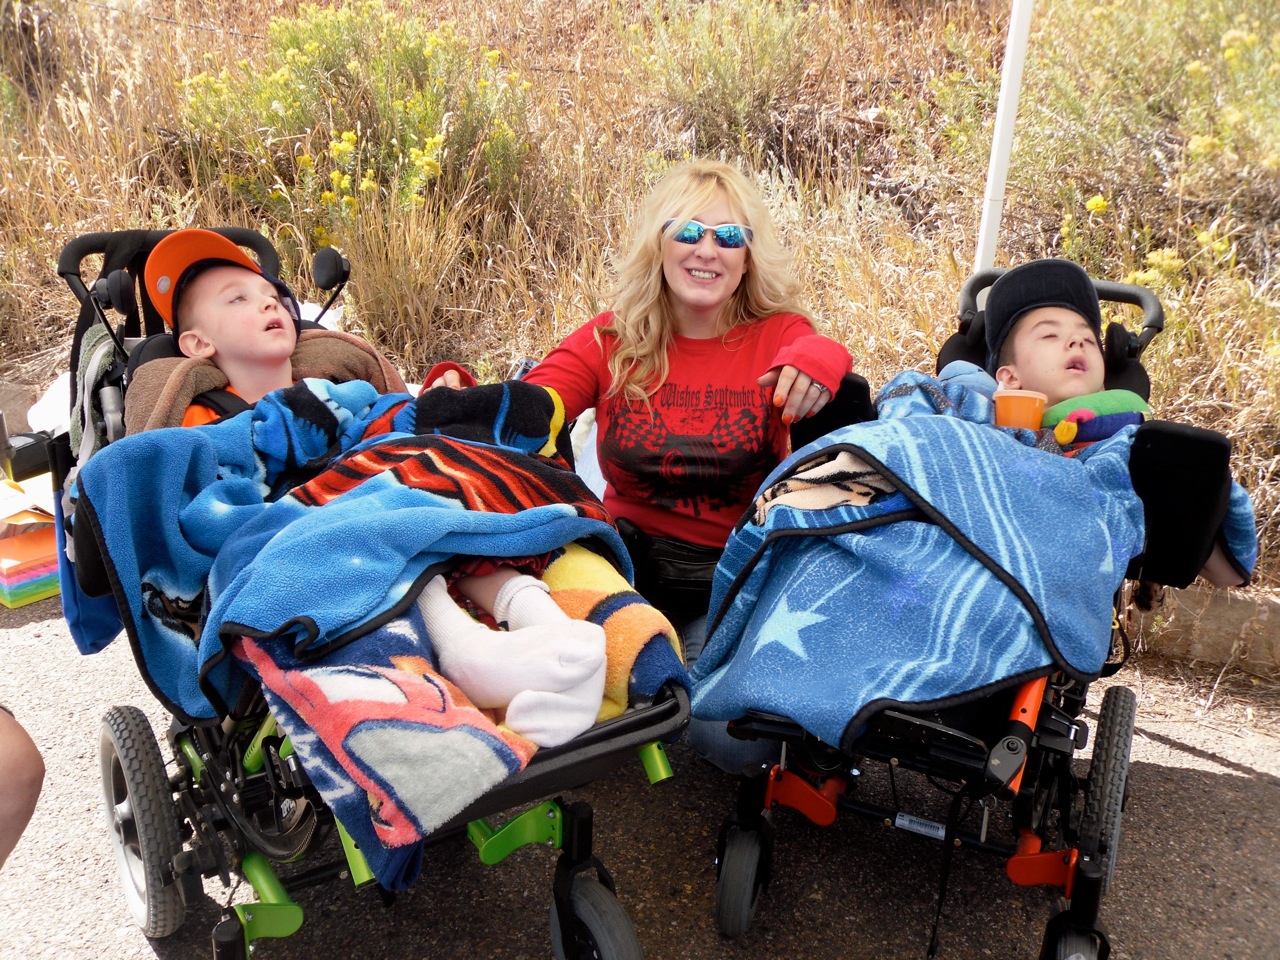 jacob wanser, cornea donor, with his brother and mother sitting outside